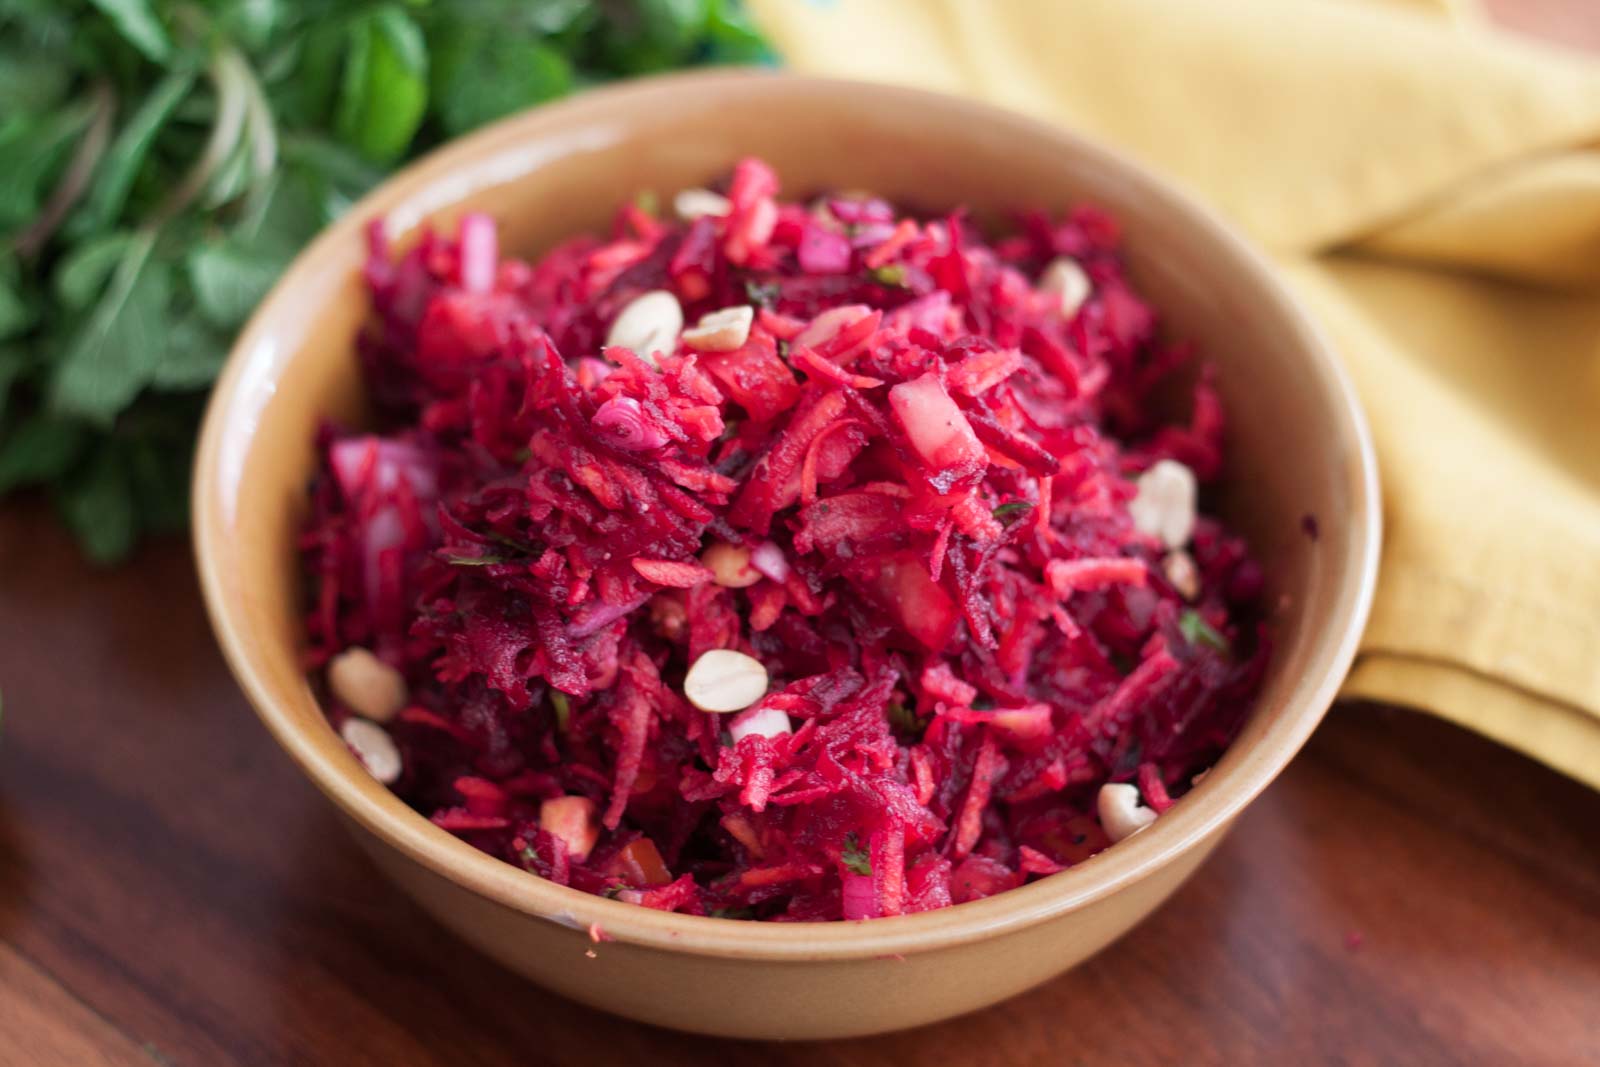 Beetroot, Carrot & Cucumber Salad with Peanuts Recipe